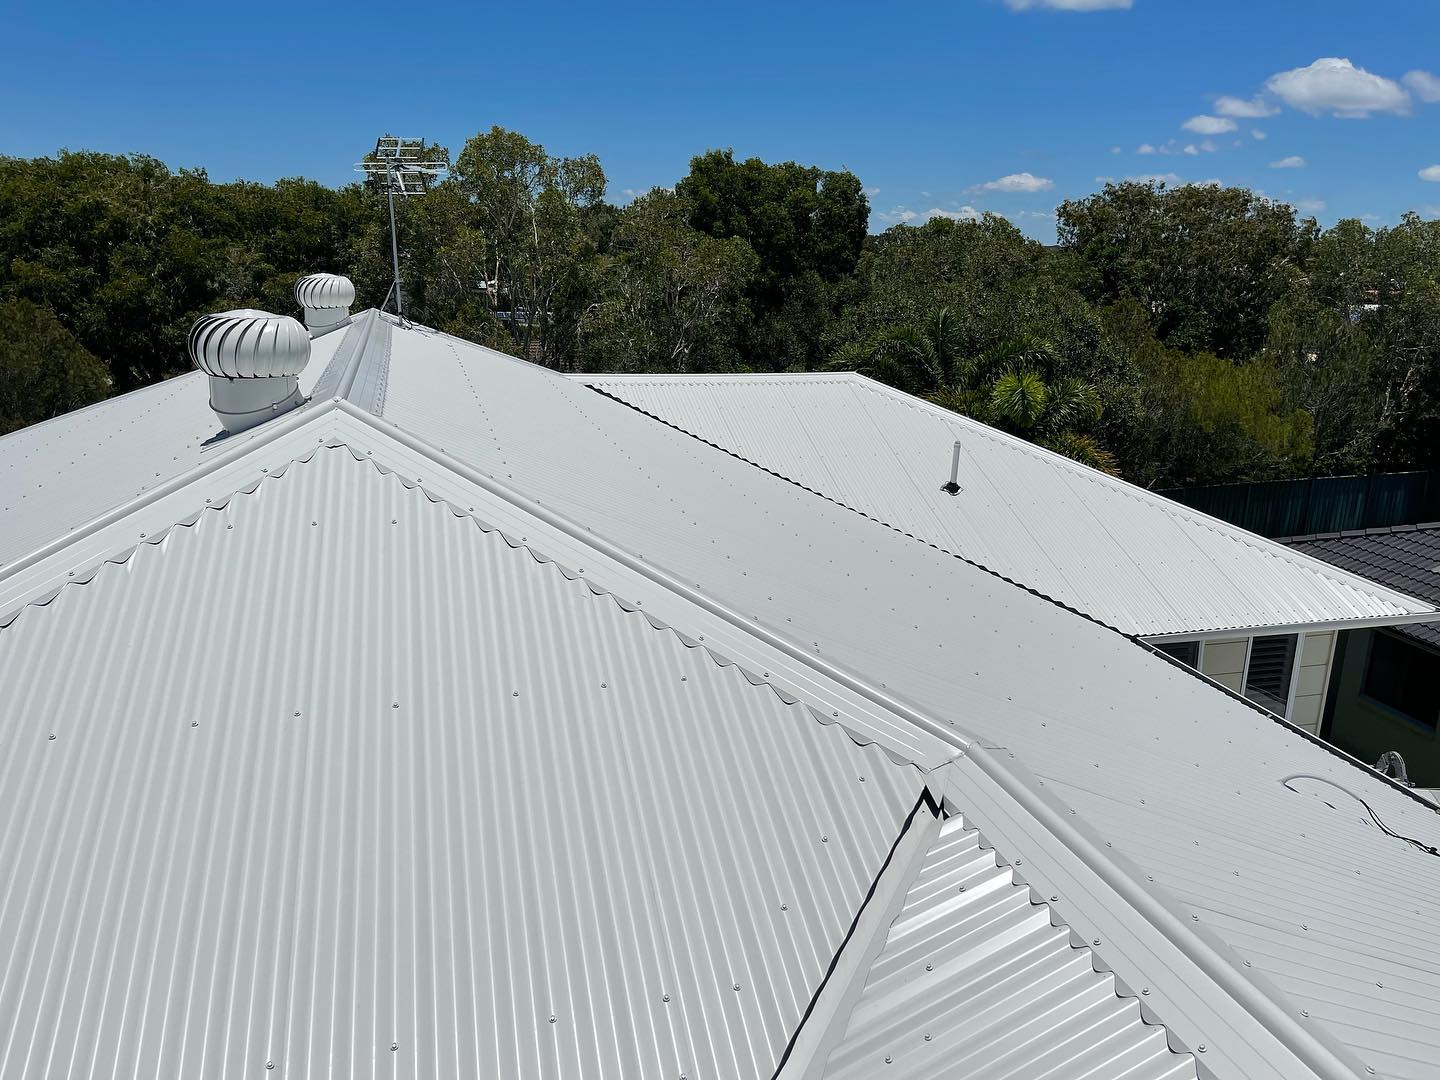 Roof repairs completed by Metro Hail team